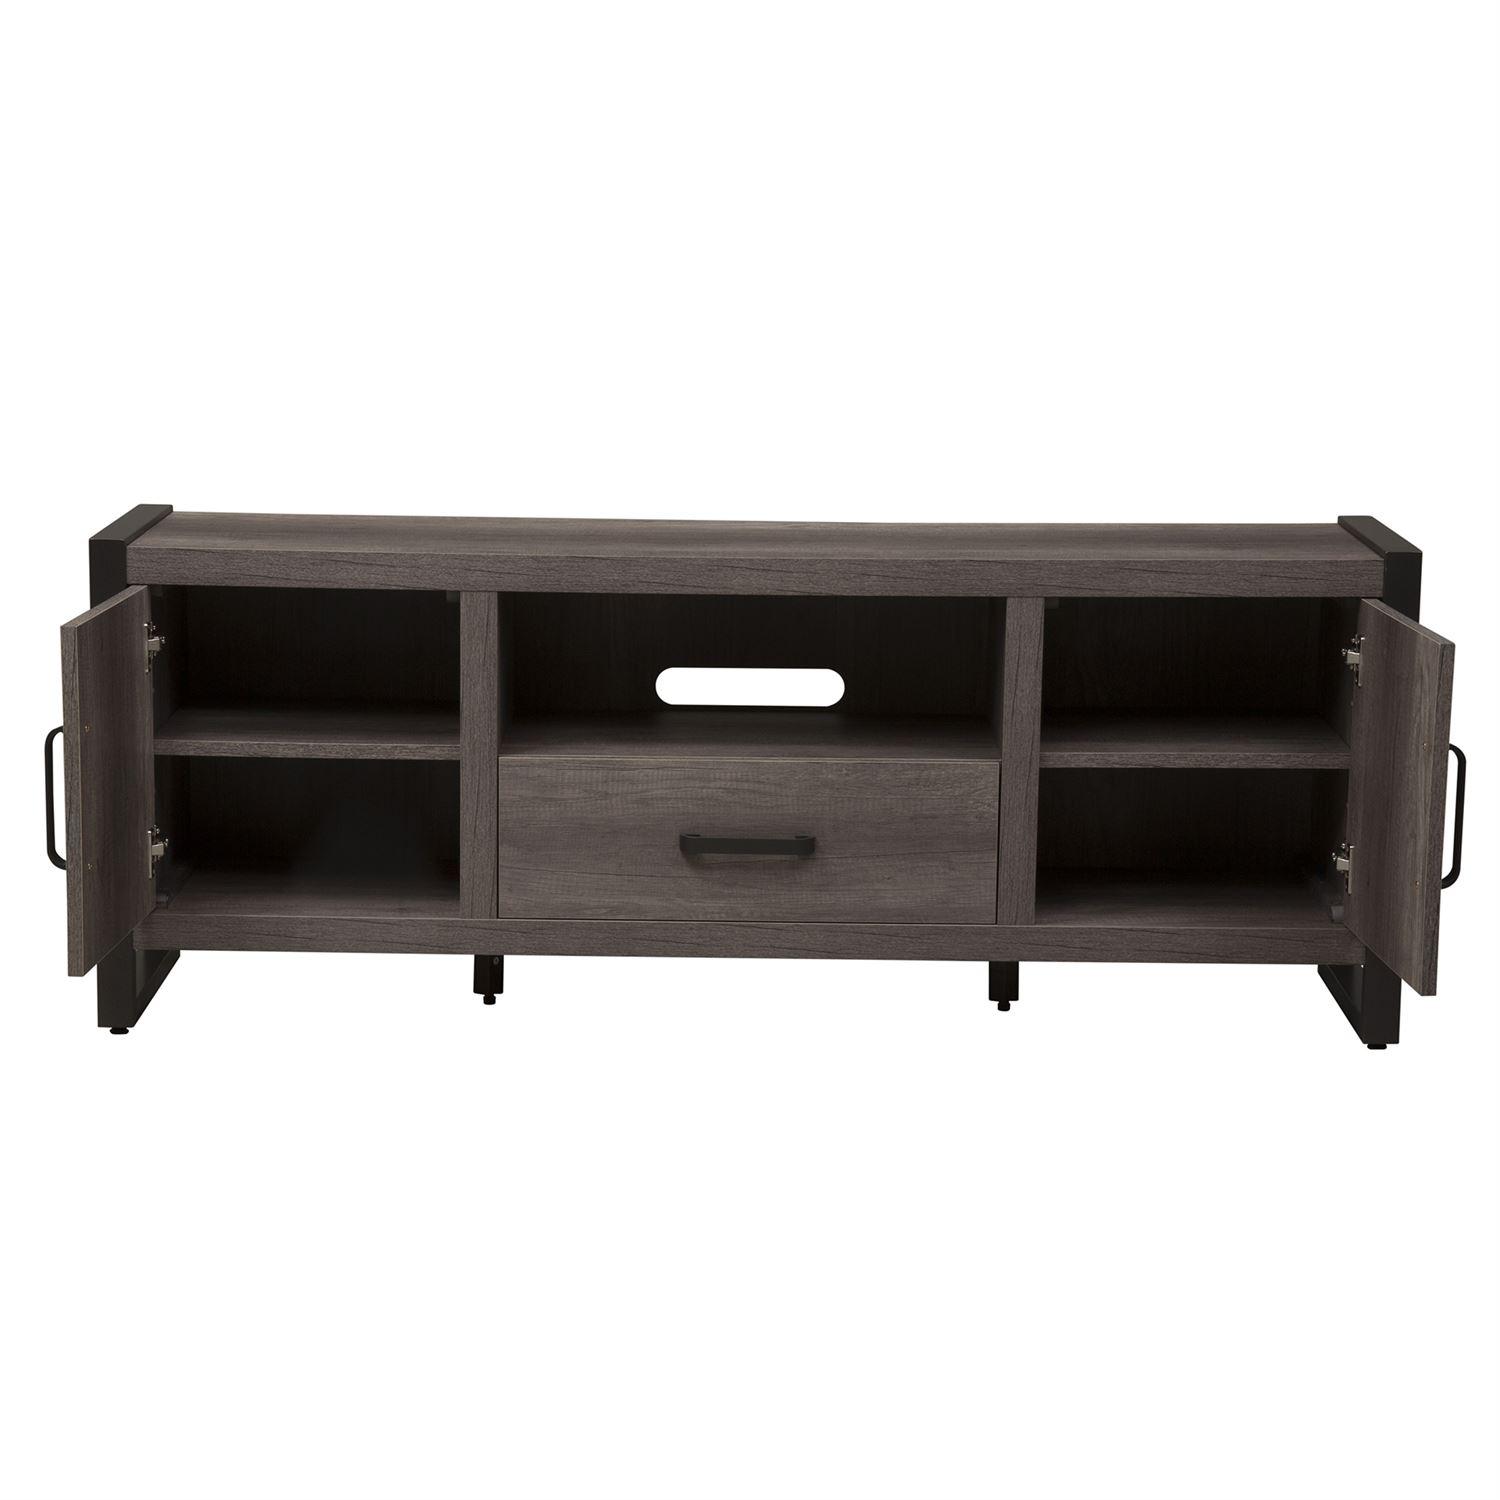 

    
Liberty Furniture Tanners Creek  (686-ENTW) TV Stand TV Stand Gray 686-TV63
